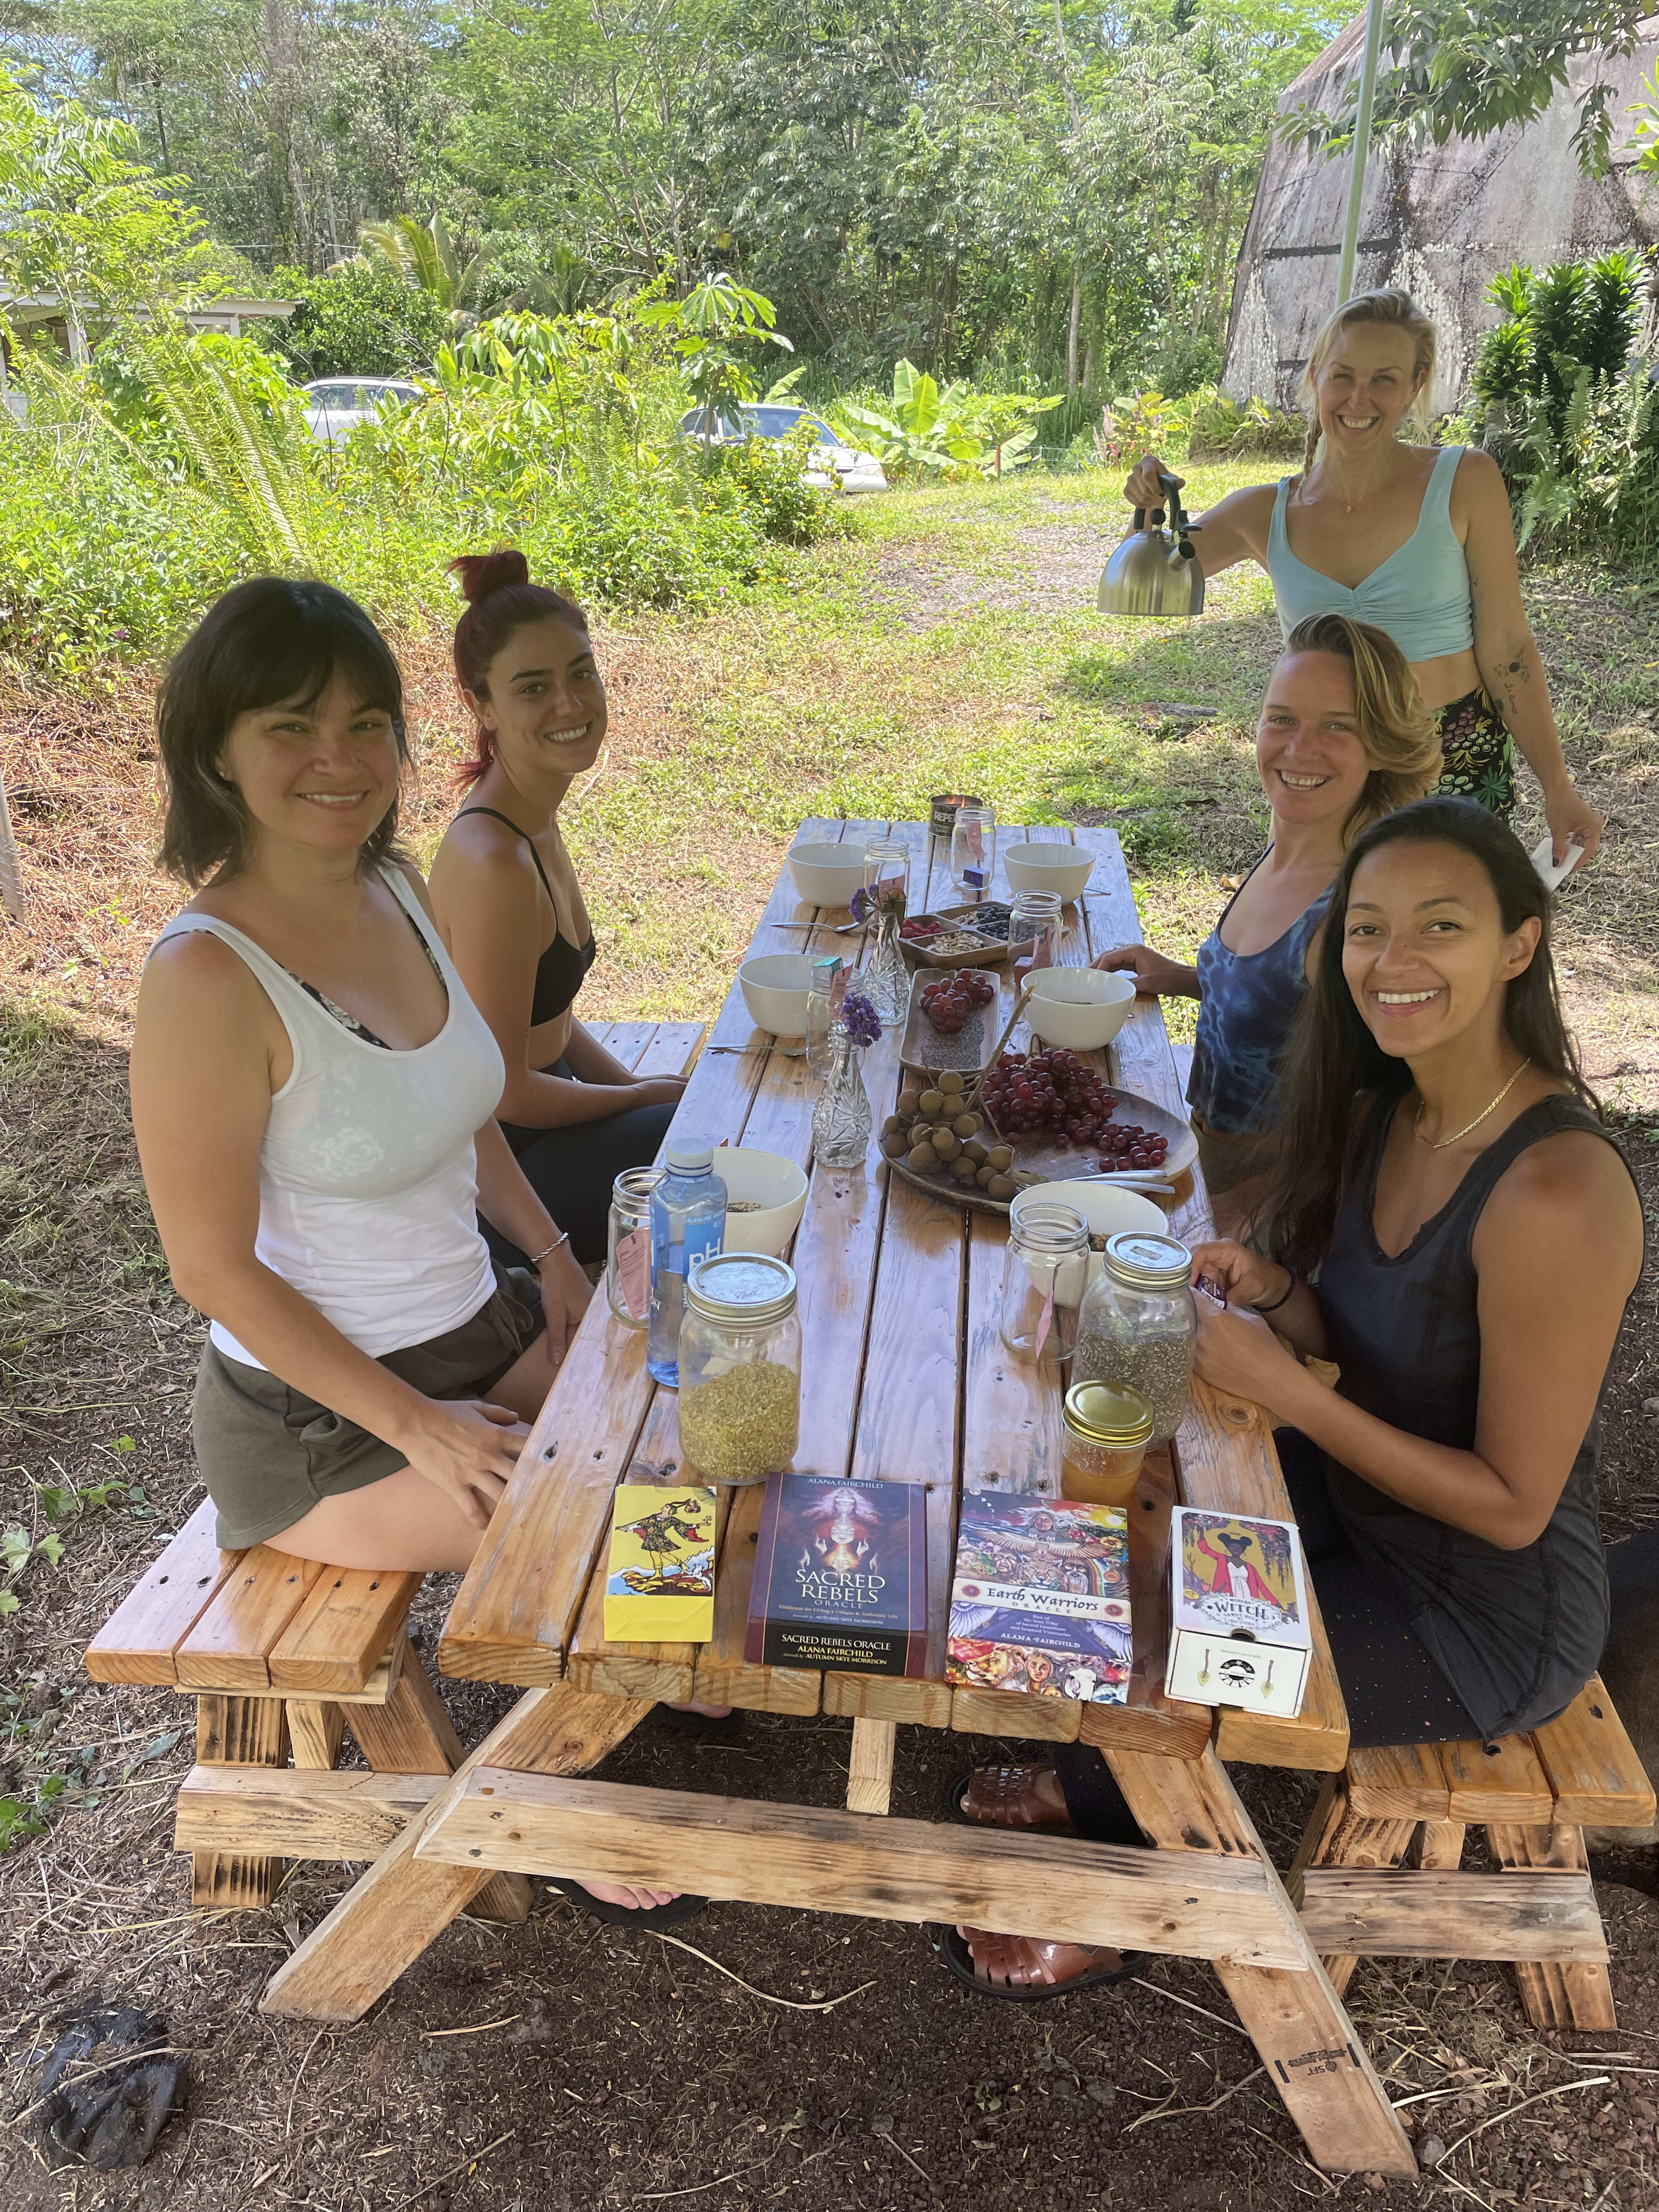 The communal picnic table is the spot to read books, draw tarot cards, create art, and chat at your leisure.